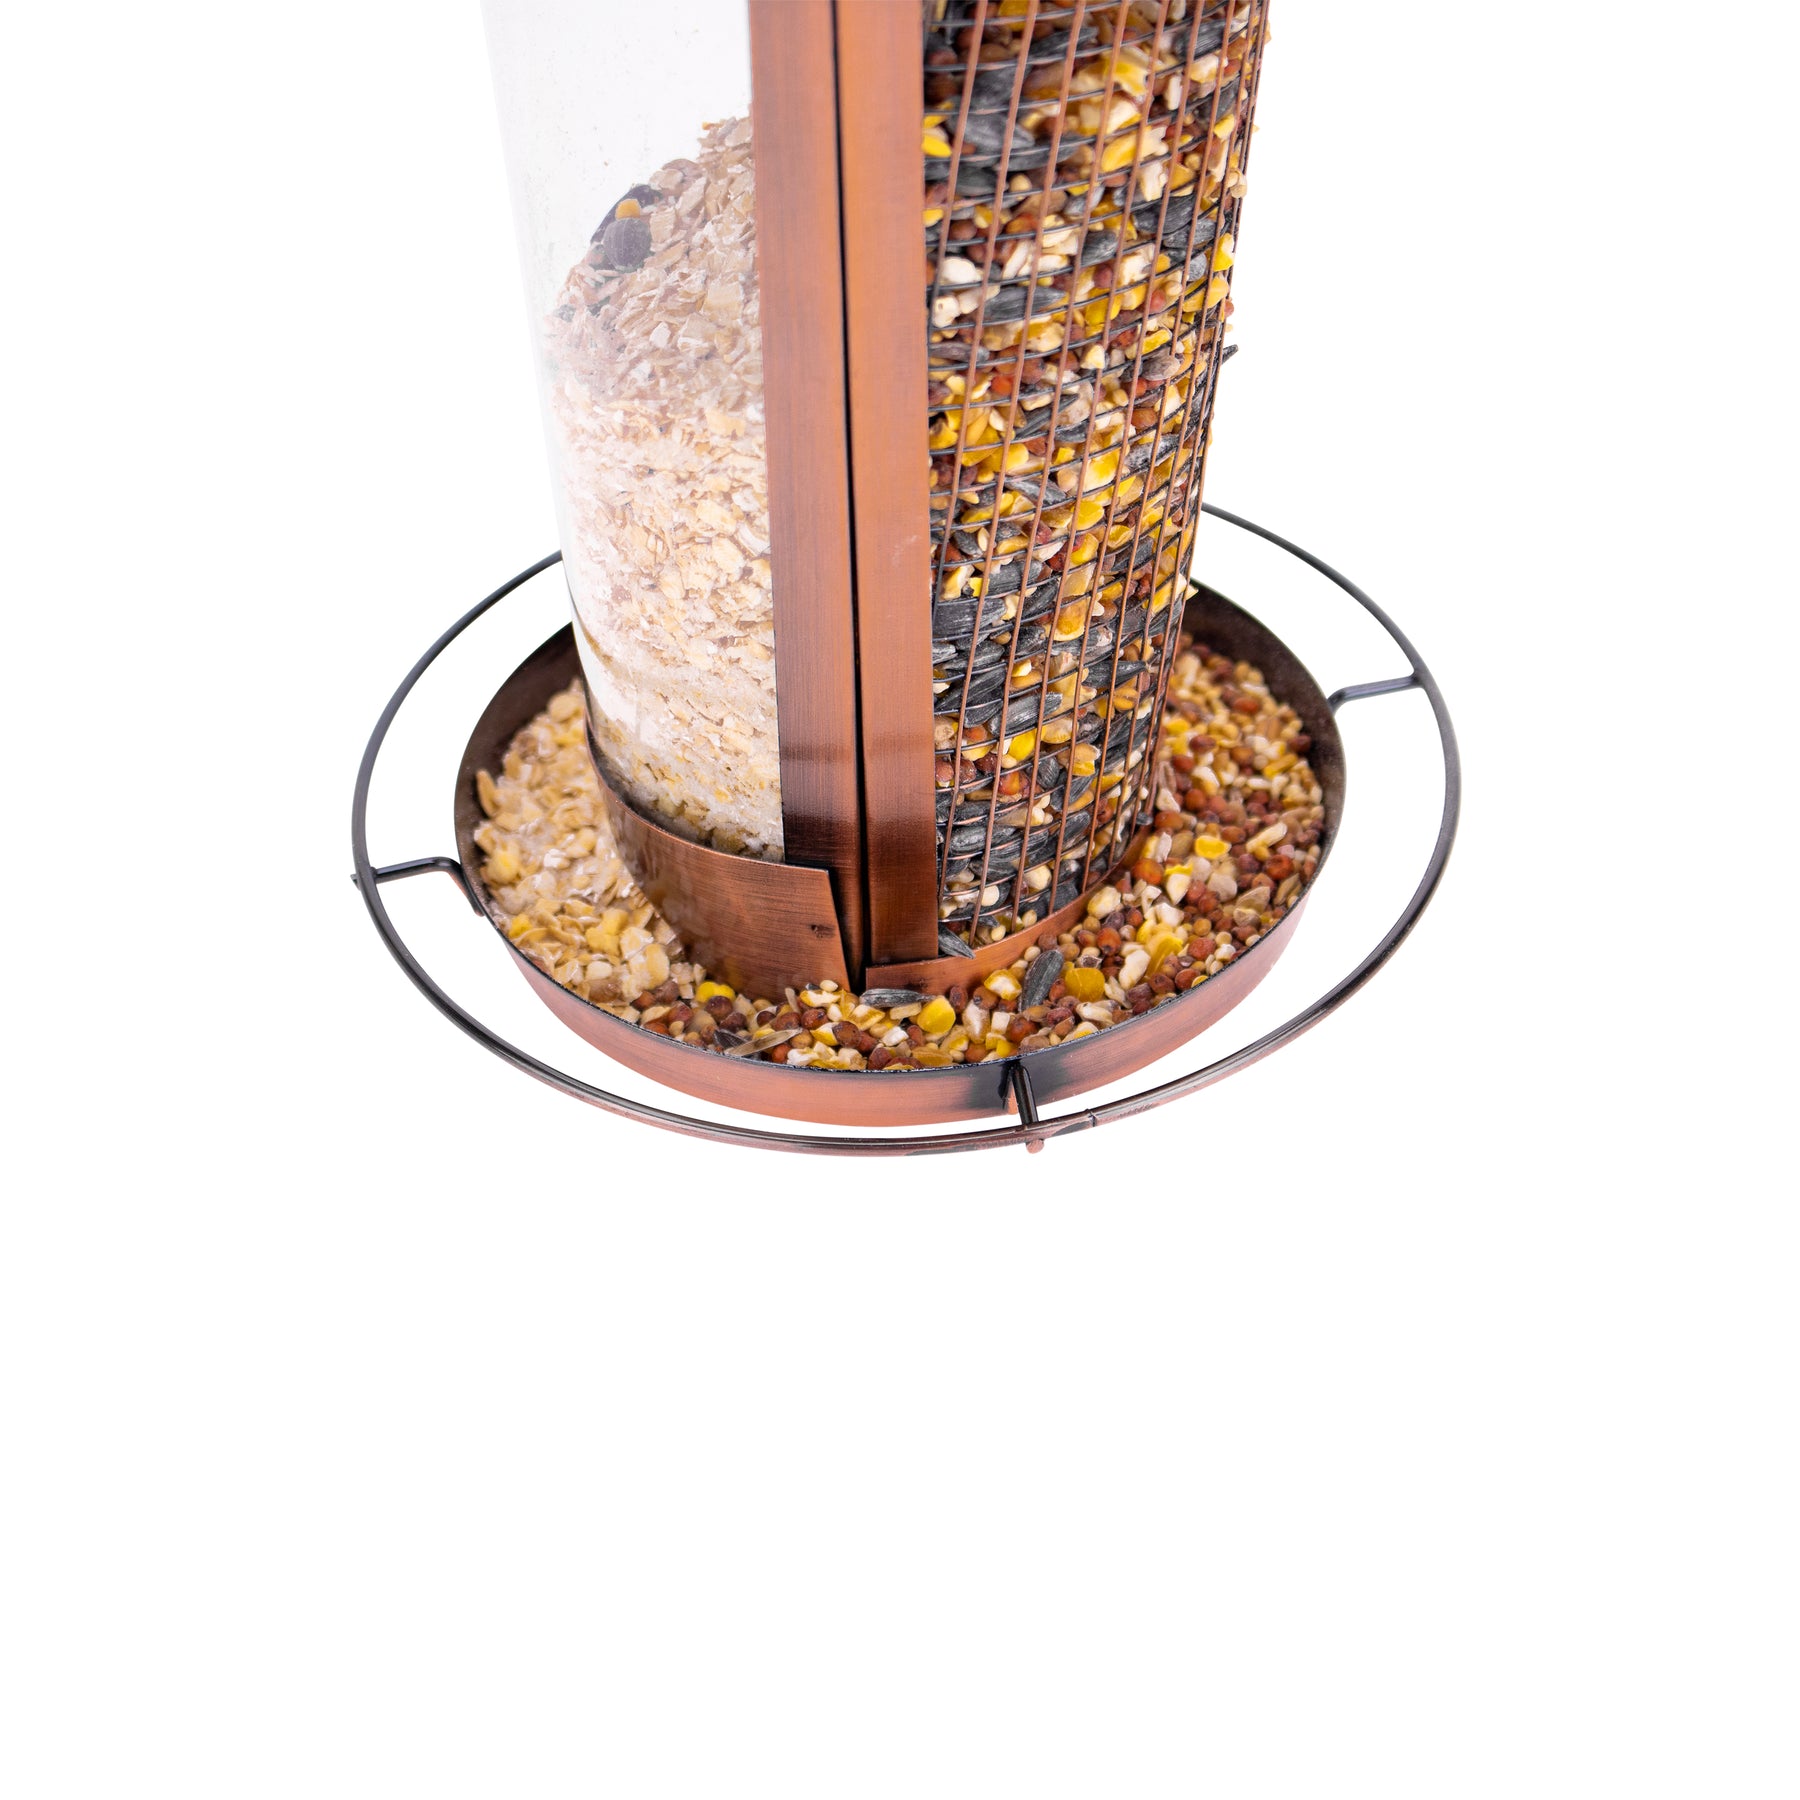 Bird seed filling the base of the Bliss Outdoors Bird Feeder.